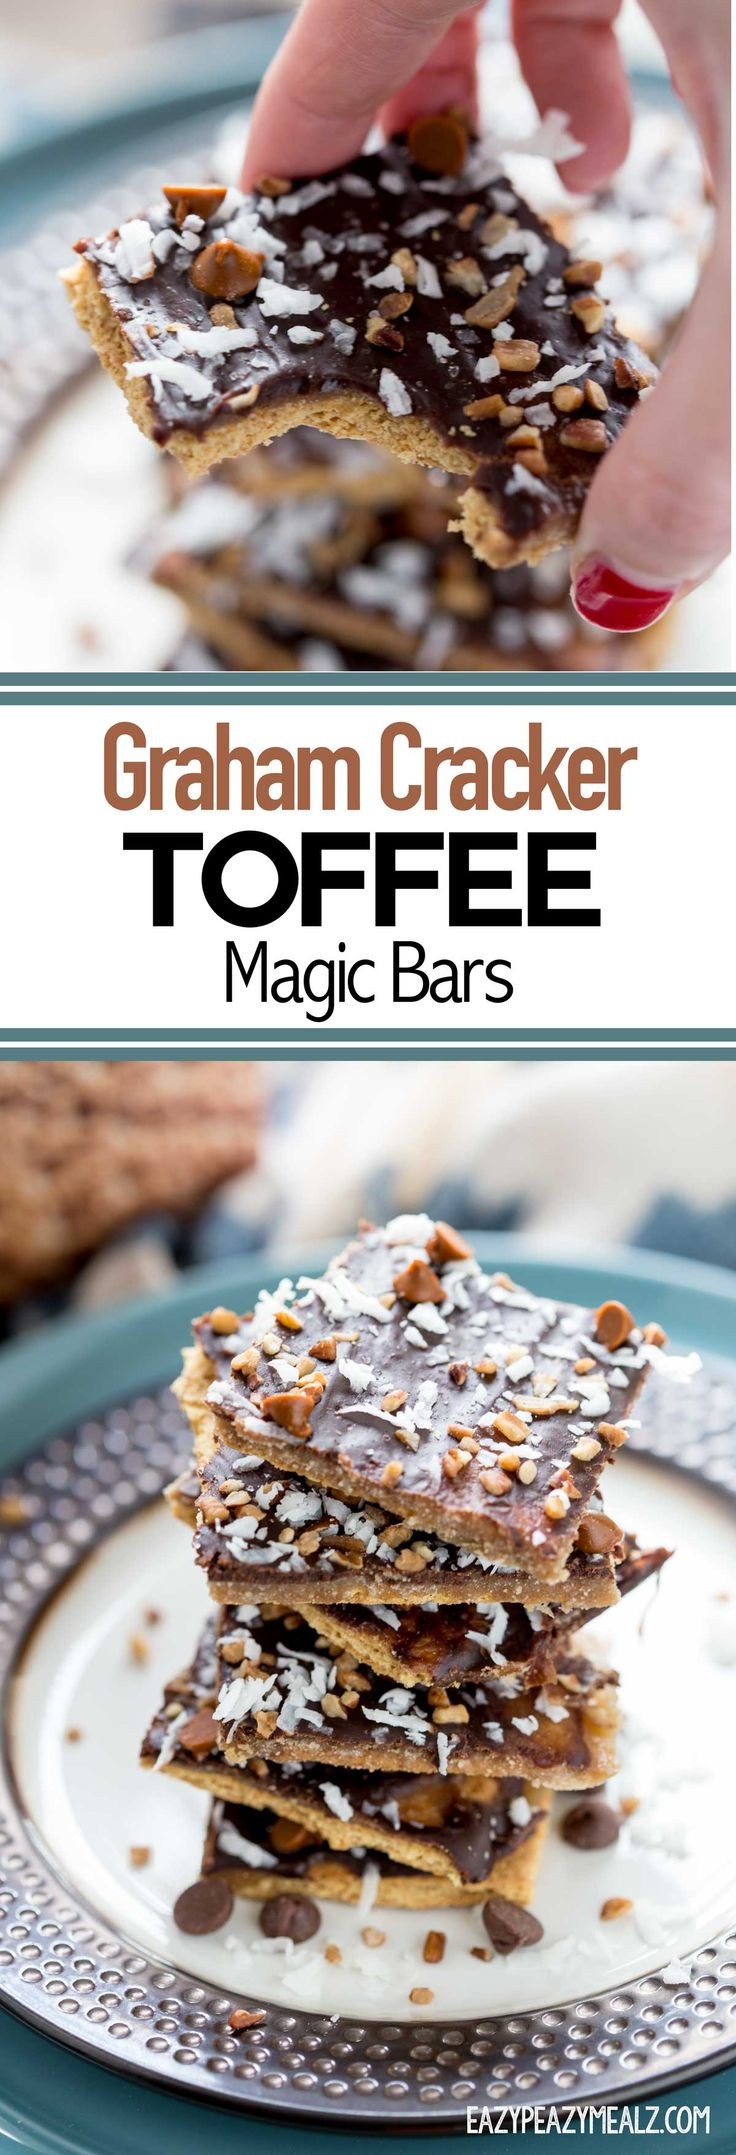 Christmas Crack Graham Crackers
 17 Best ideas about Cracker Toffee on Pinterest